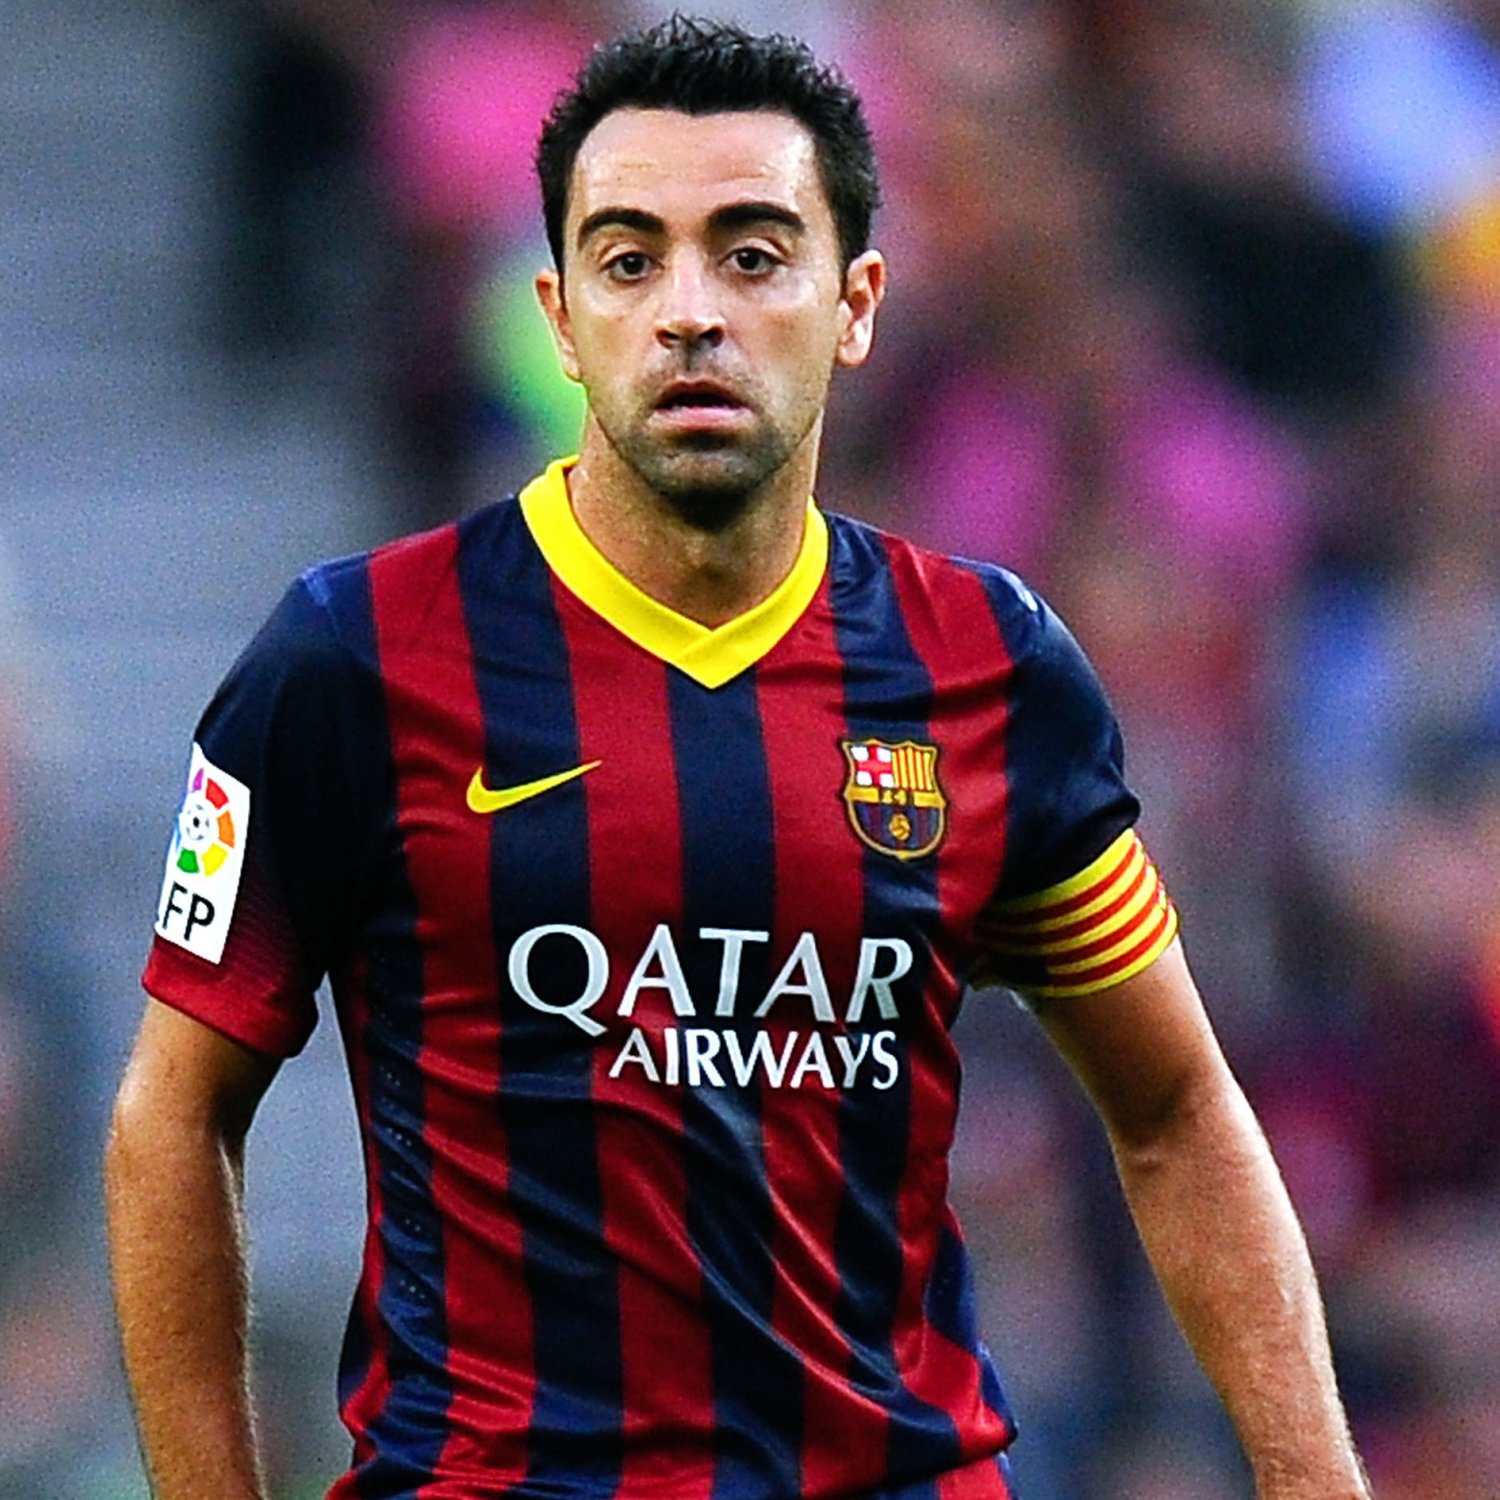 Important things about soccer: Interview of Xavi Hernandez